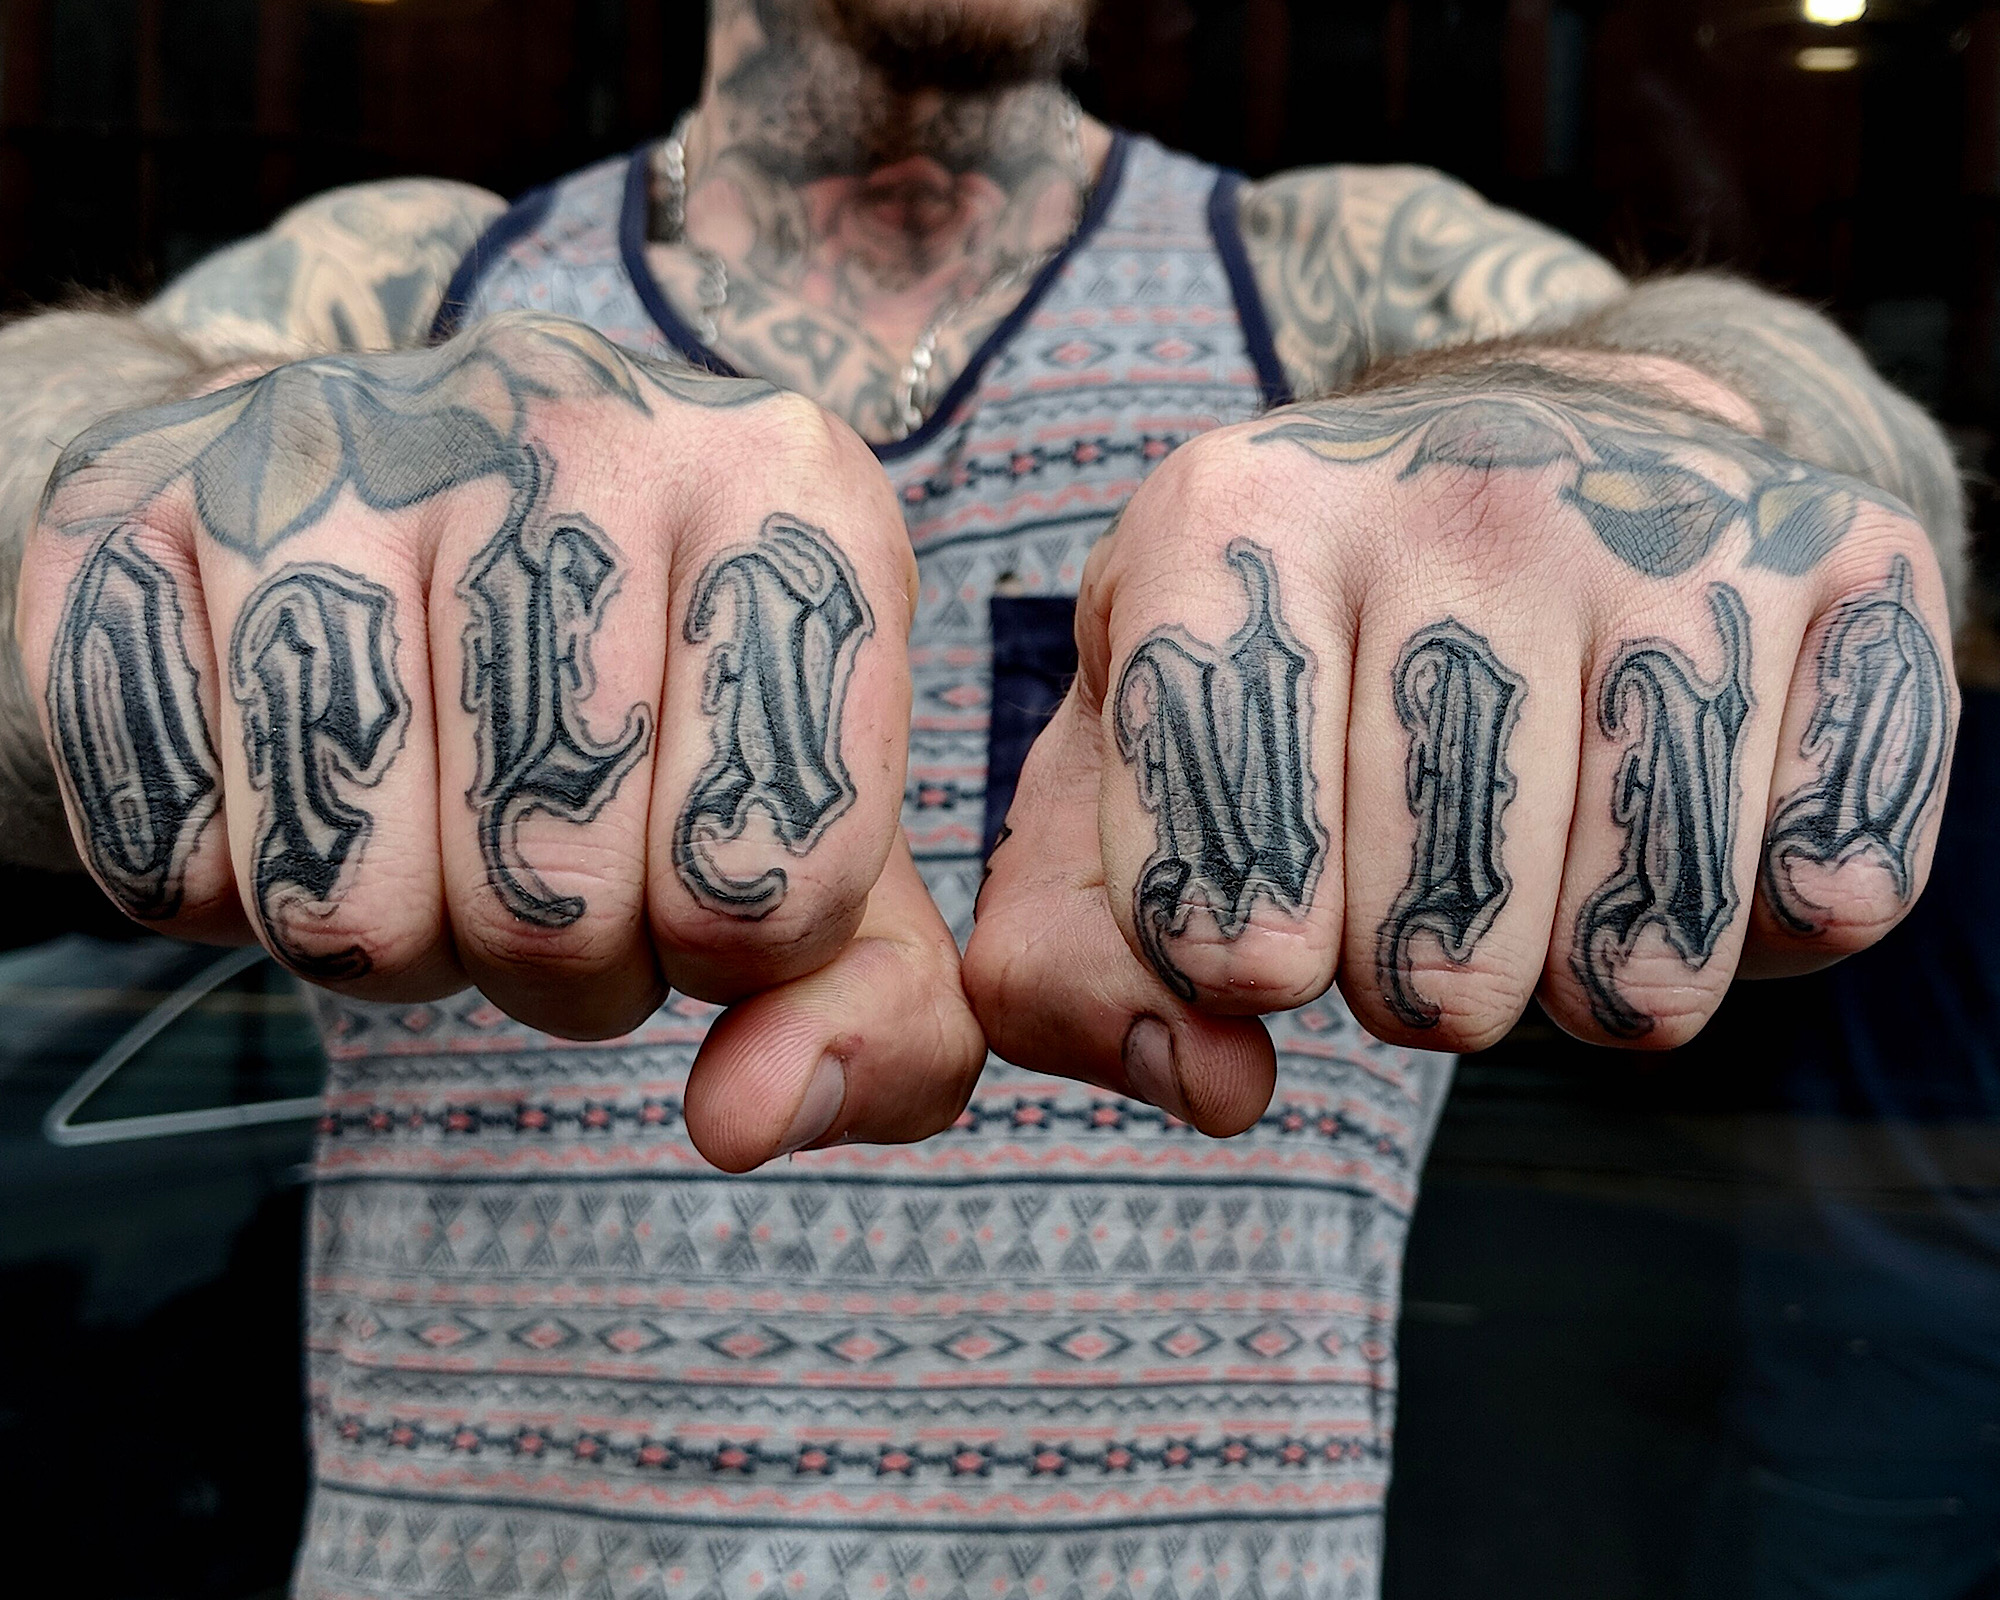 Blackletter Gothic style finger tattoo open mind old english style lettering love letters black and grey gray lettering hand tattoo by Ricks custom tattooing Ricardo Pedro at Nexus Collective